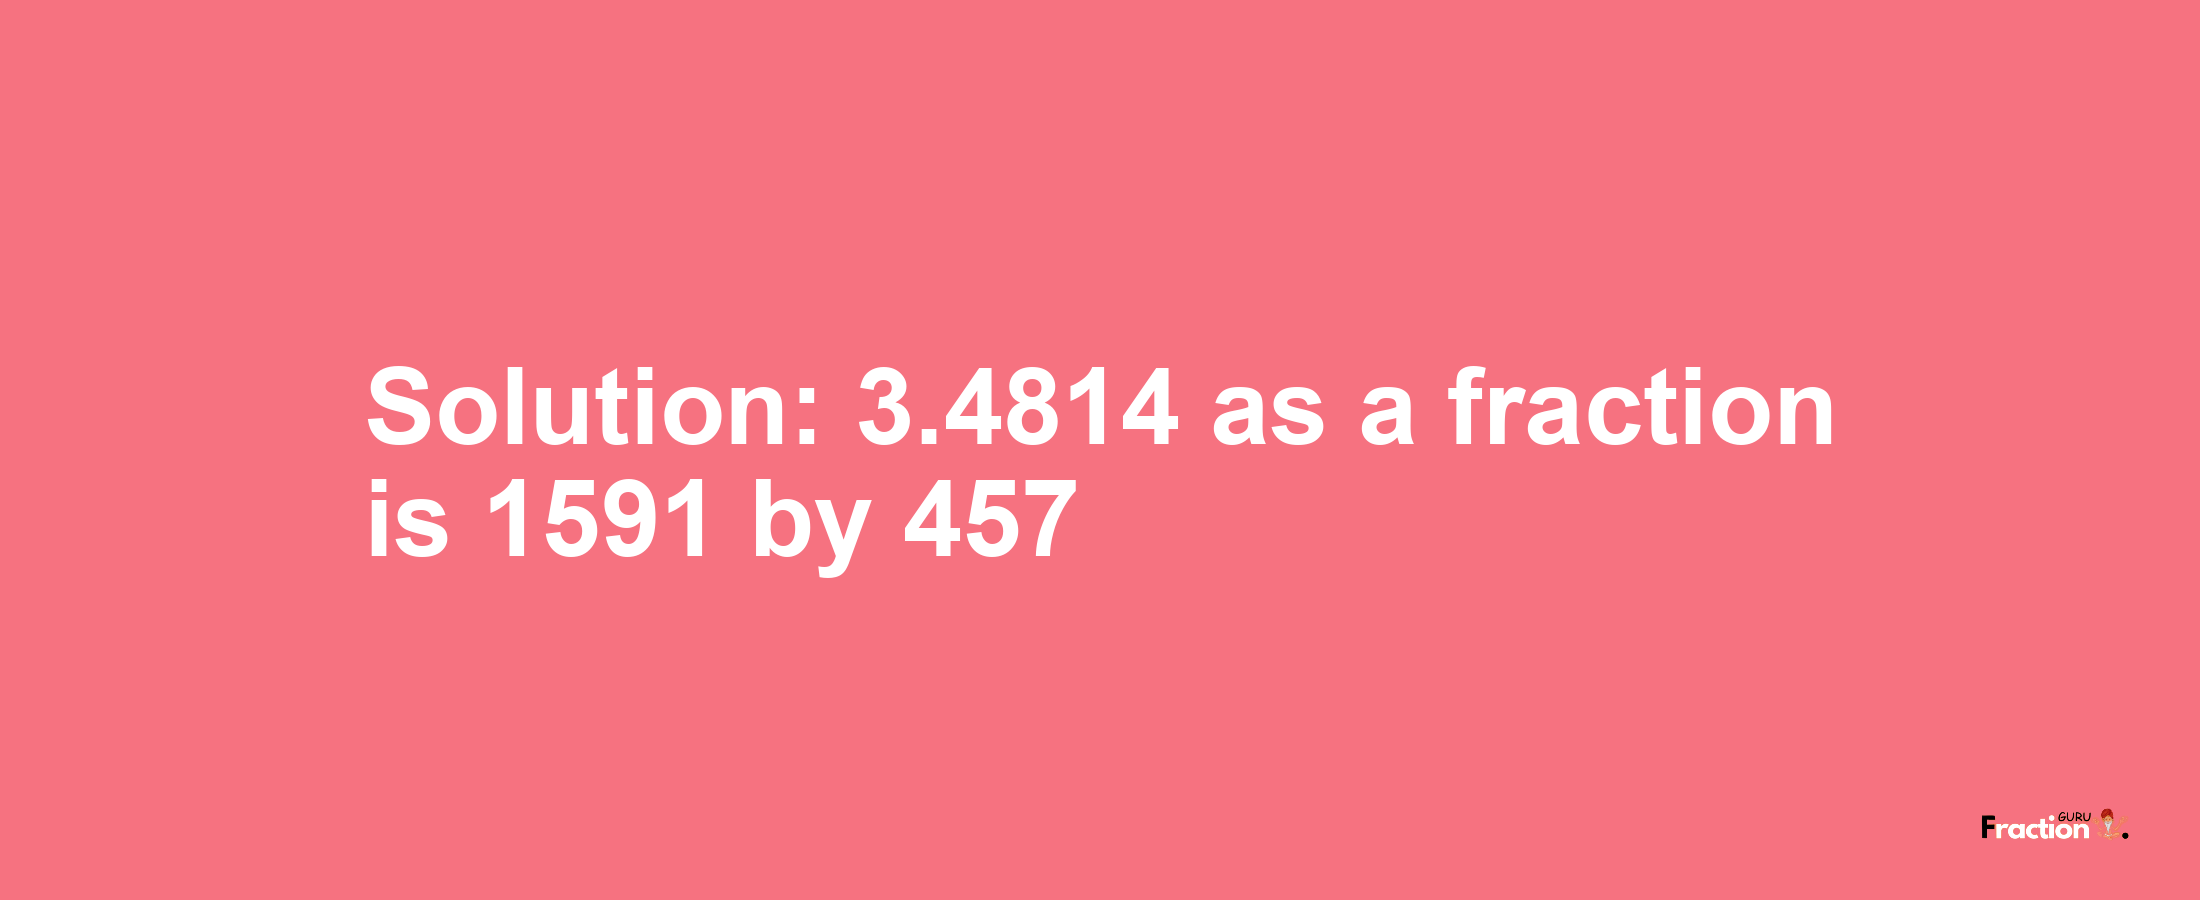 Solution:3.4814 as a fraction is 1591/457